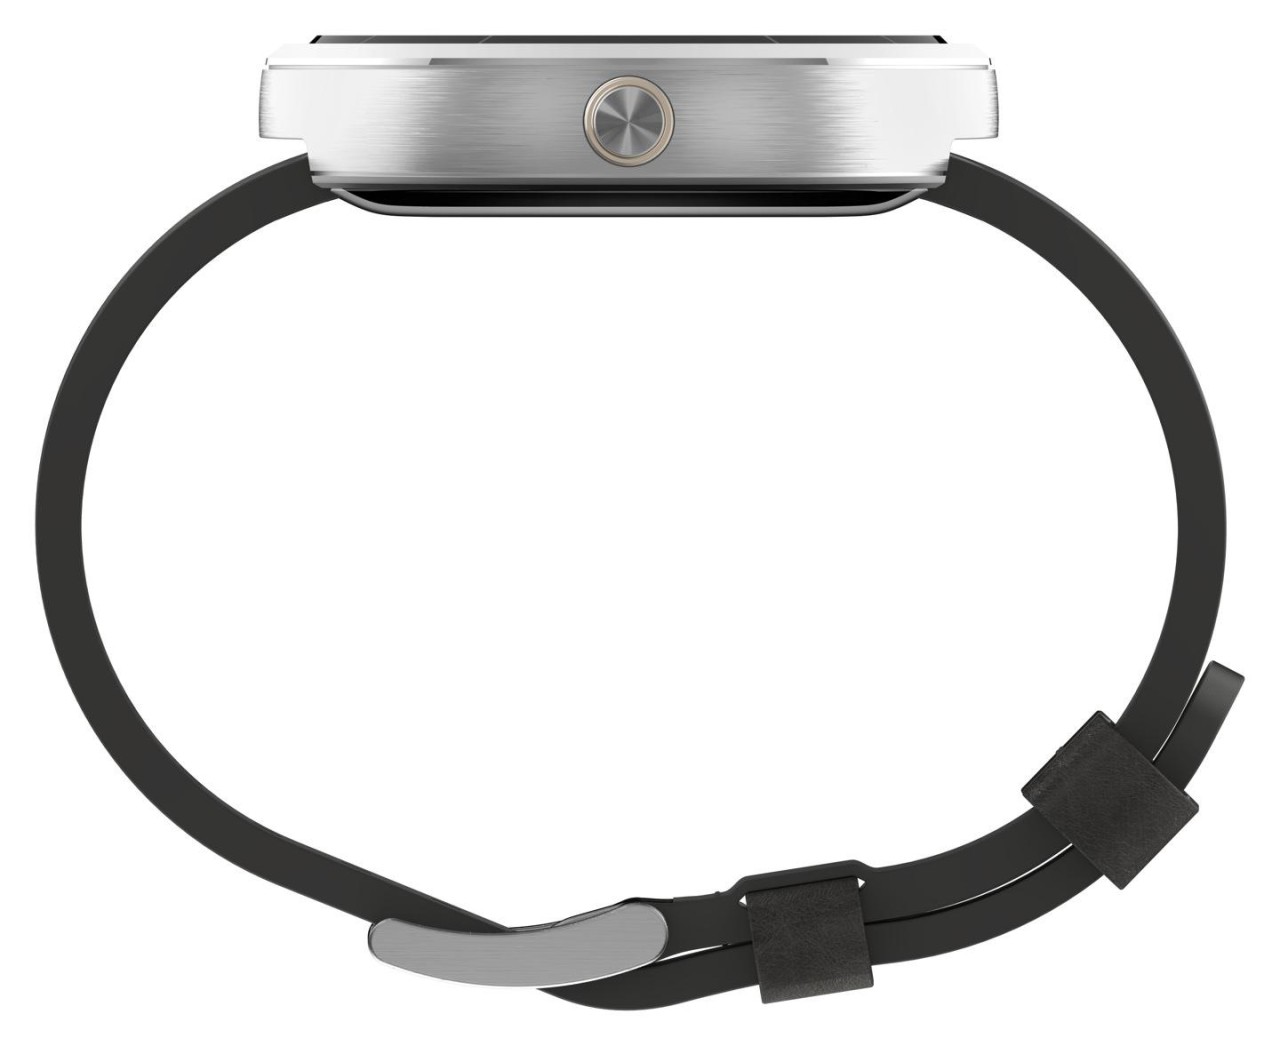 Moto 360 Press Images 11 1280x1046 - The Moto 360 is now available for $250